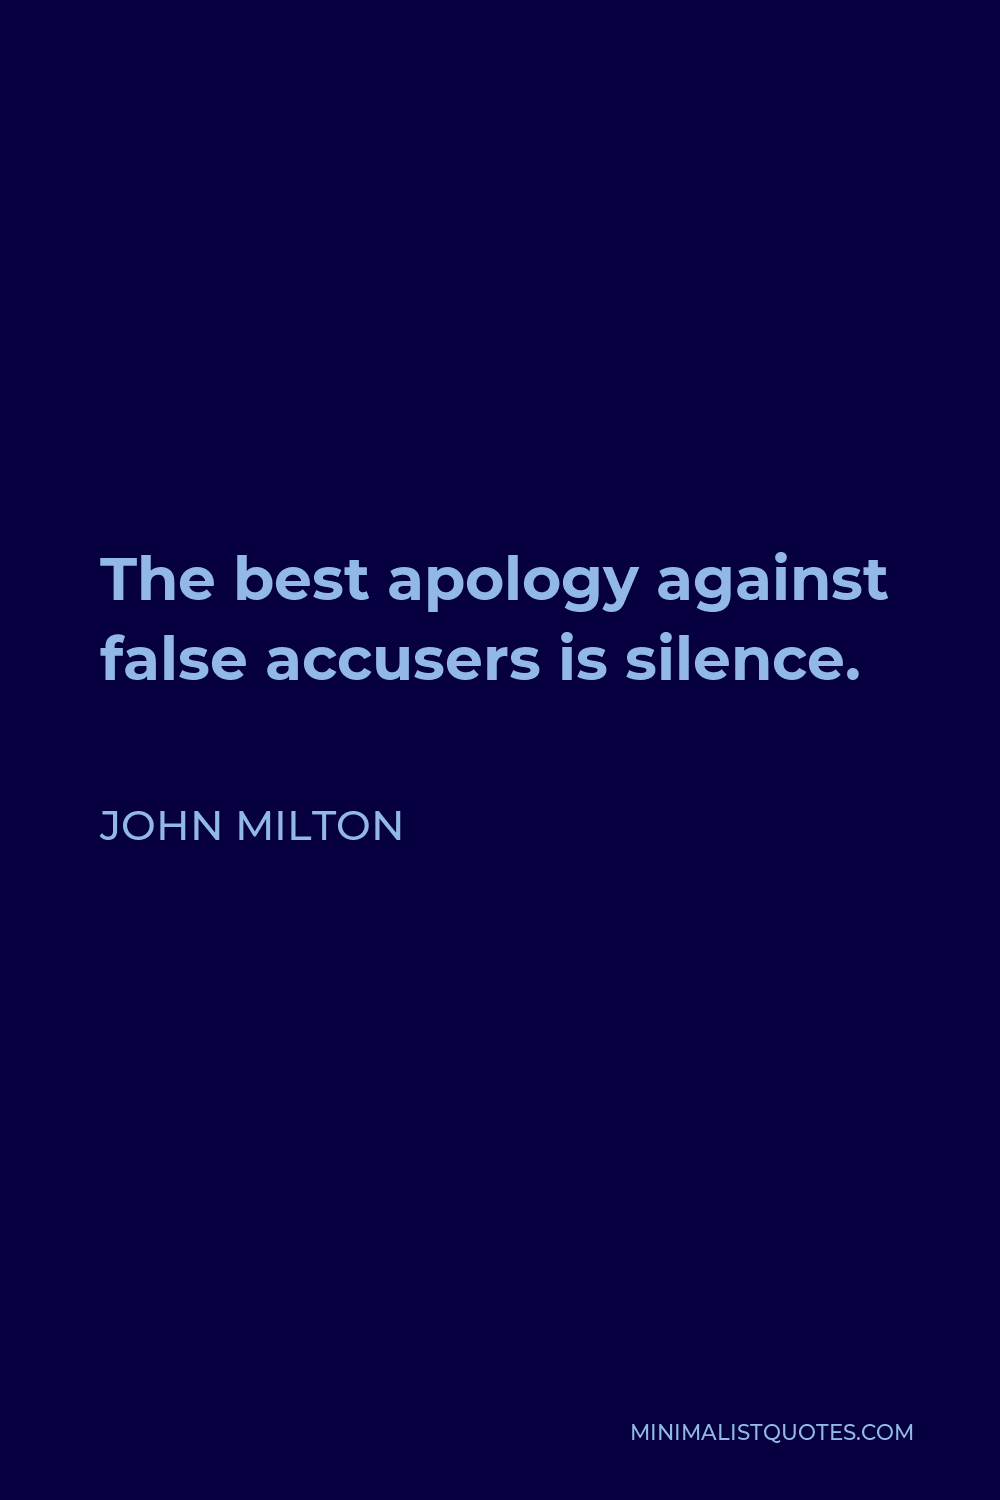 John Milton Quote - The best apology against false accusers is silence.